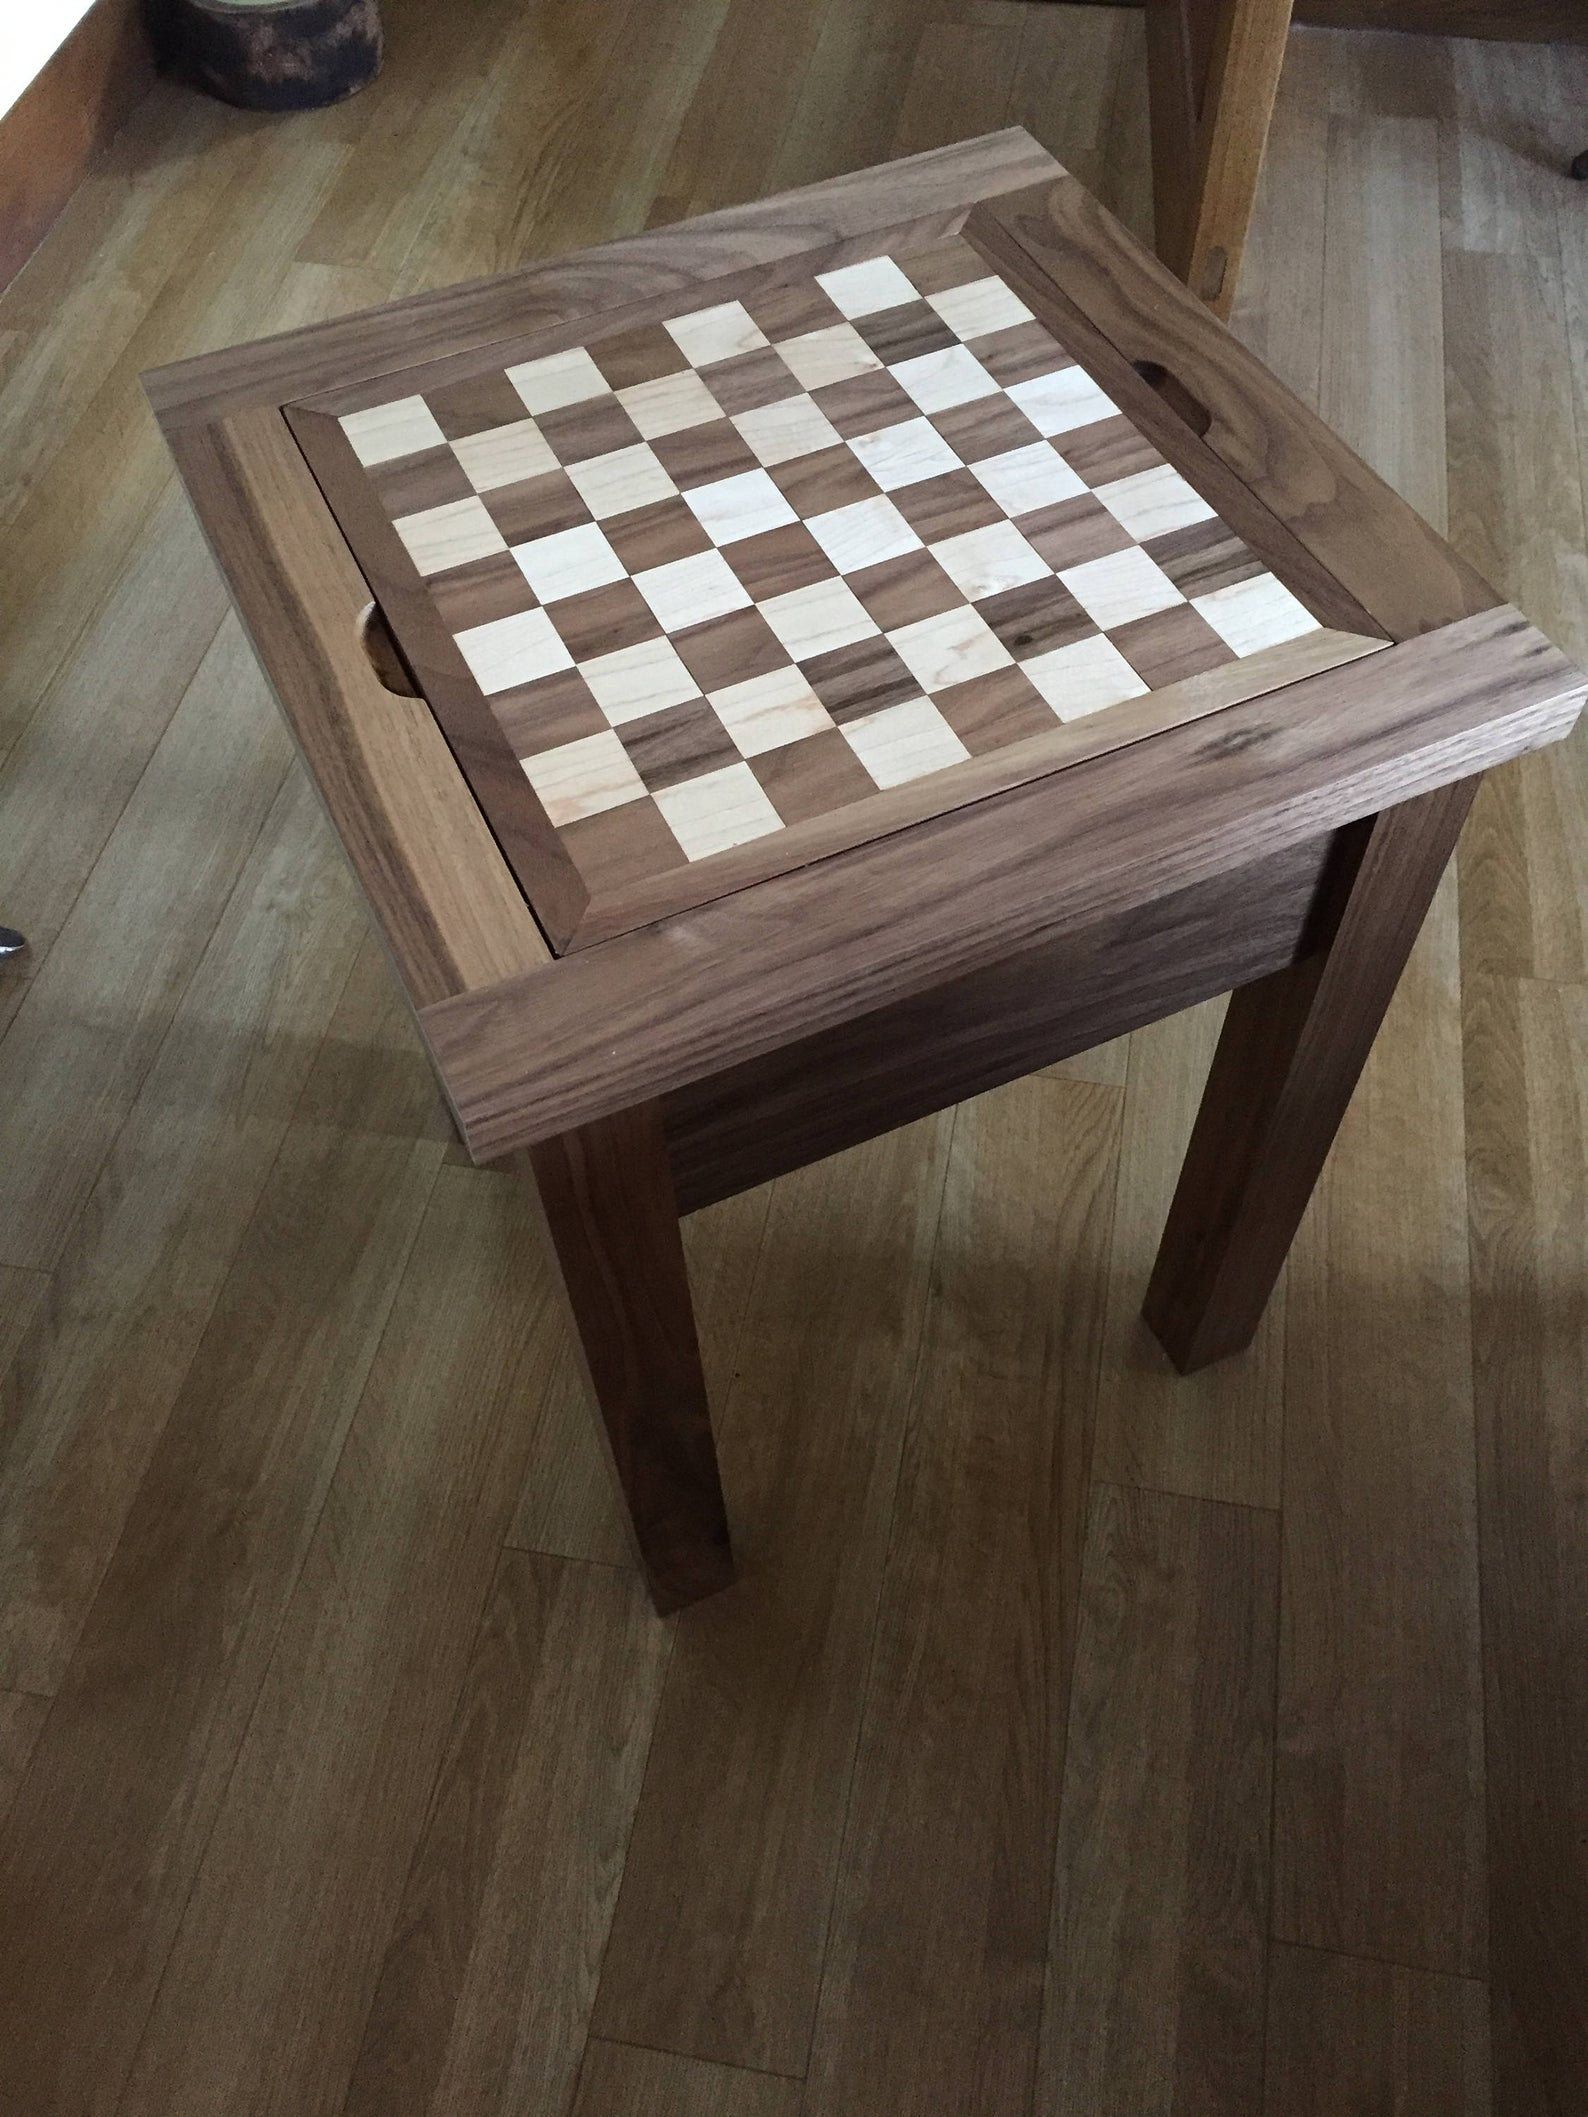 Disappointment upper mouth Chess tables - Chess Forums - Chess.com